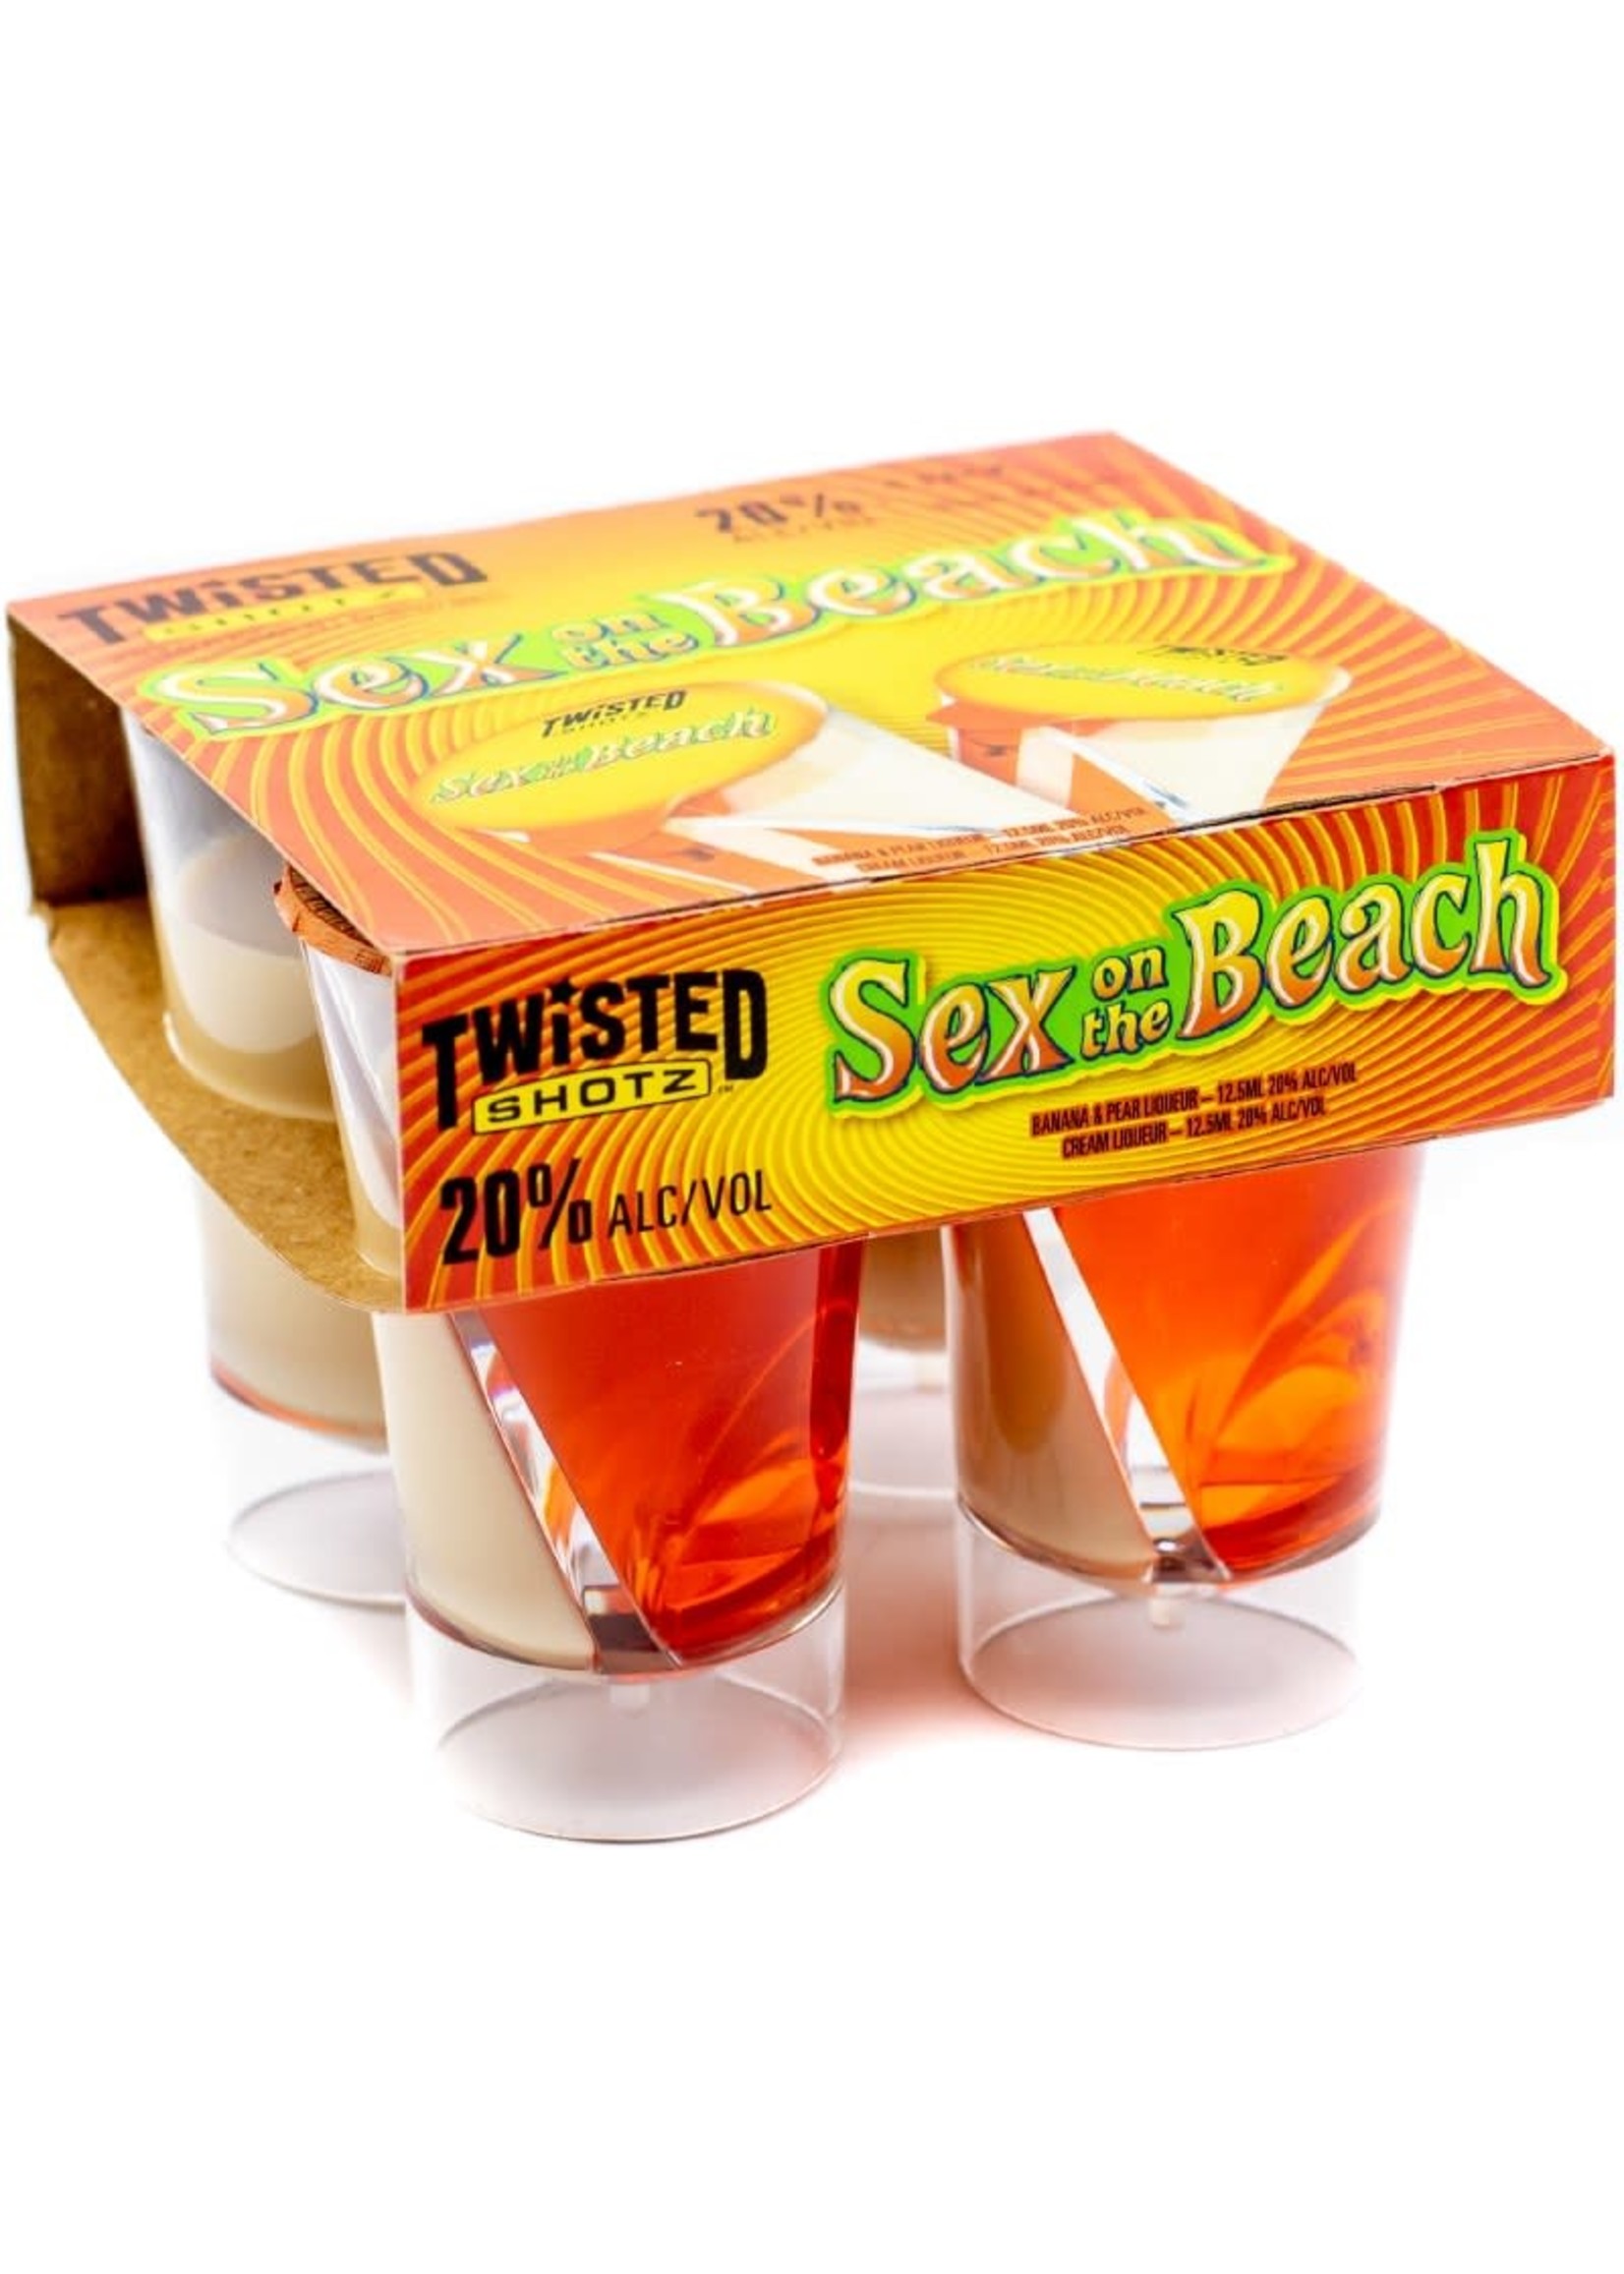 Twisted Shotz Twisted Shotz Sex On The Beach Cocktail 40Proof Pet 4pk 25ml